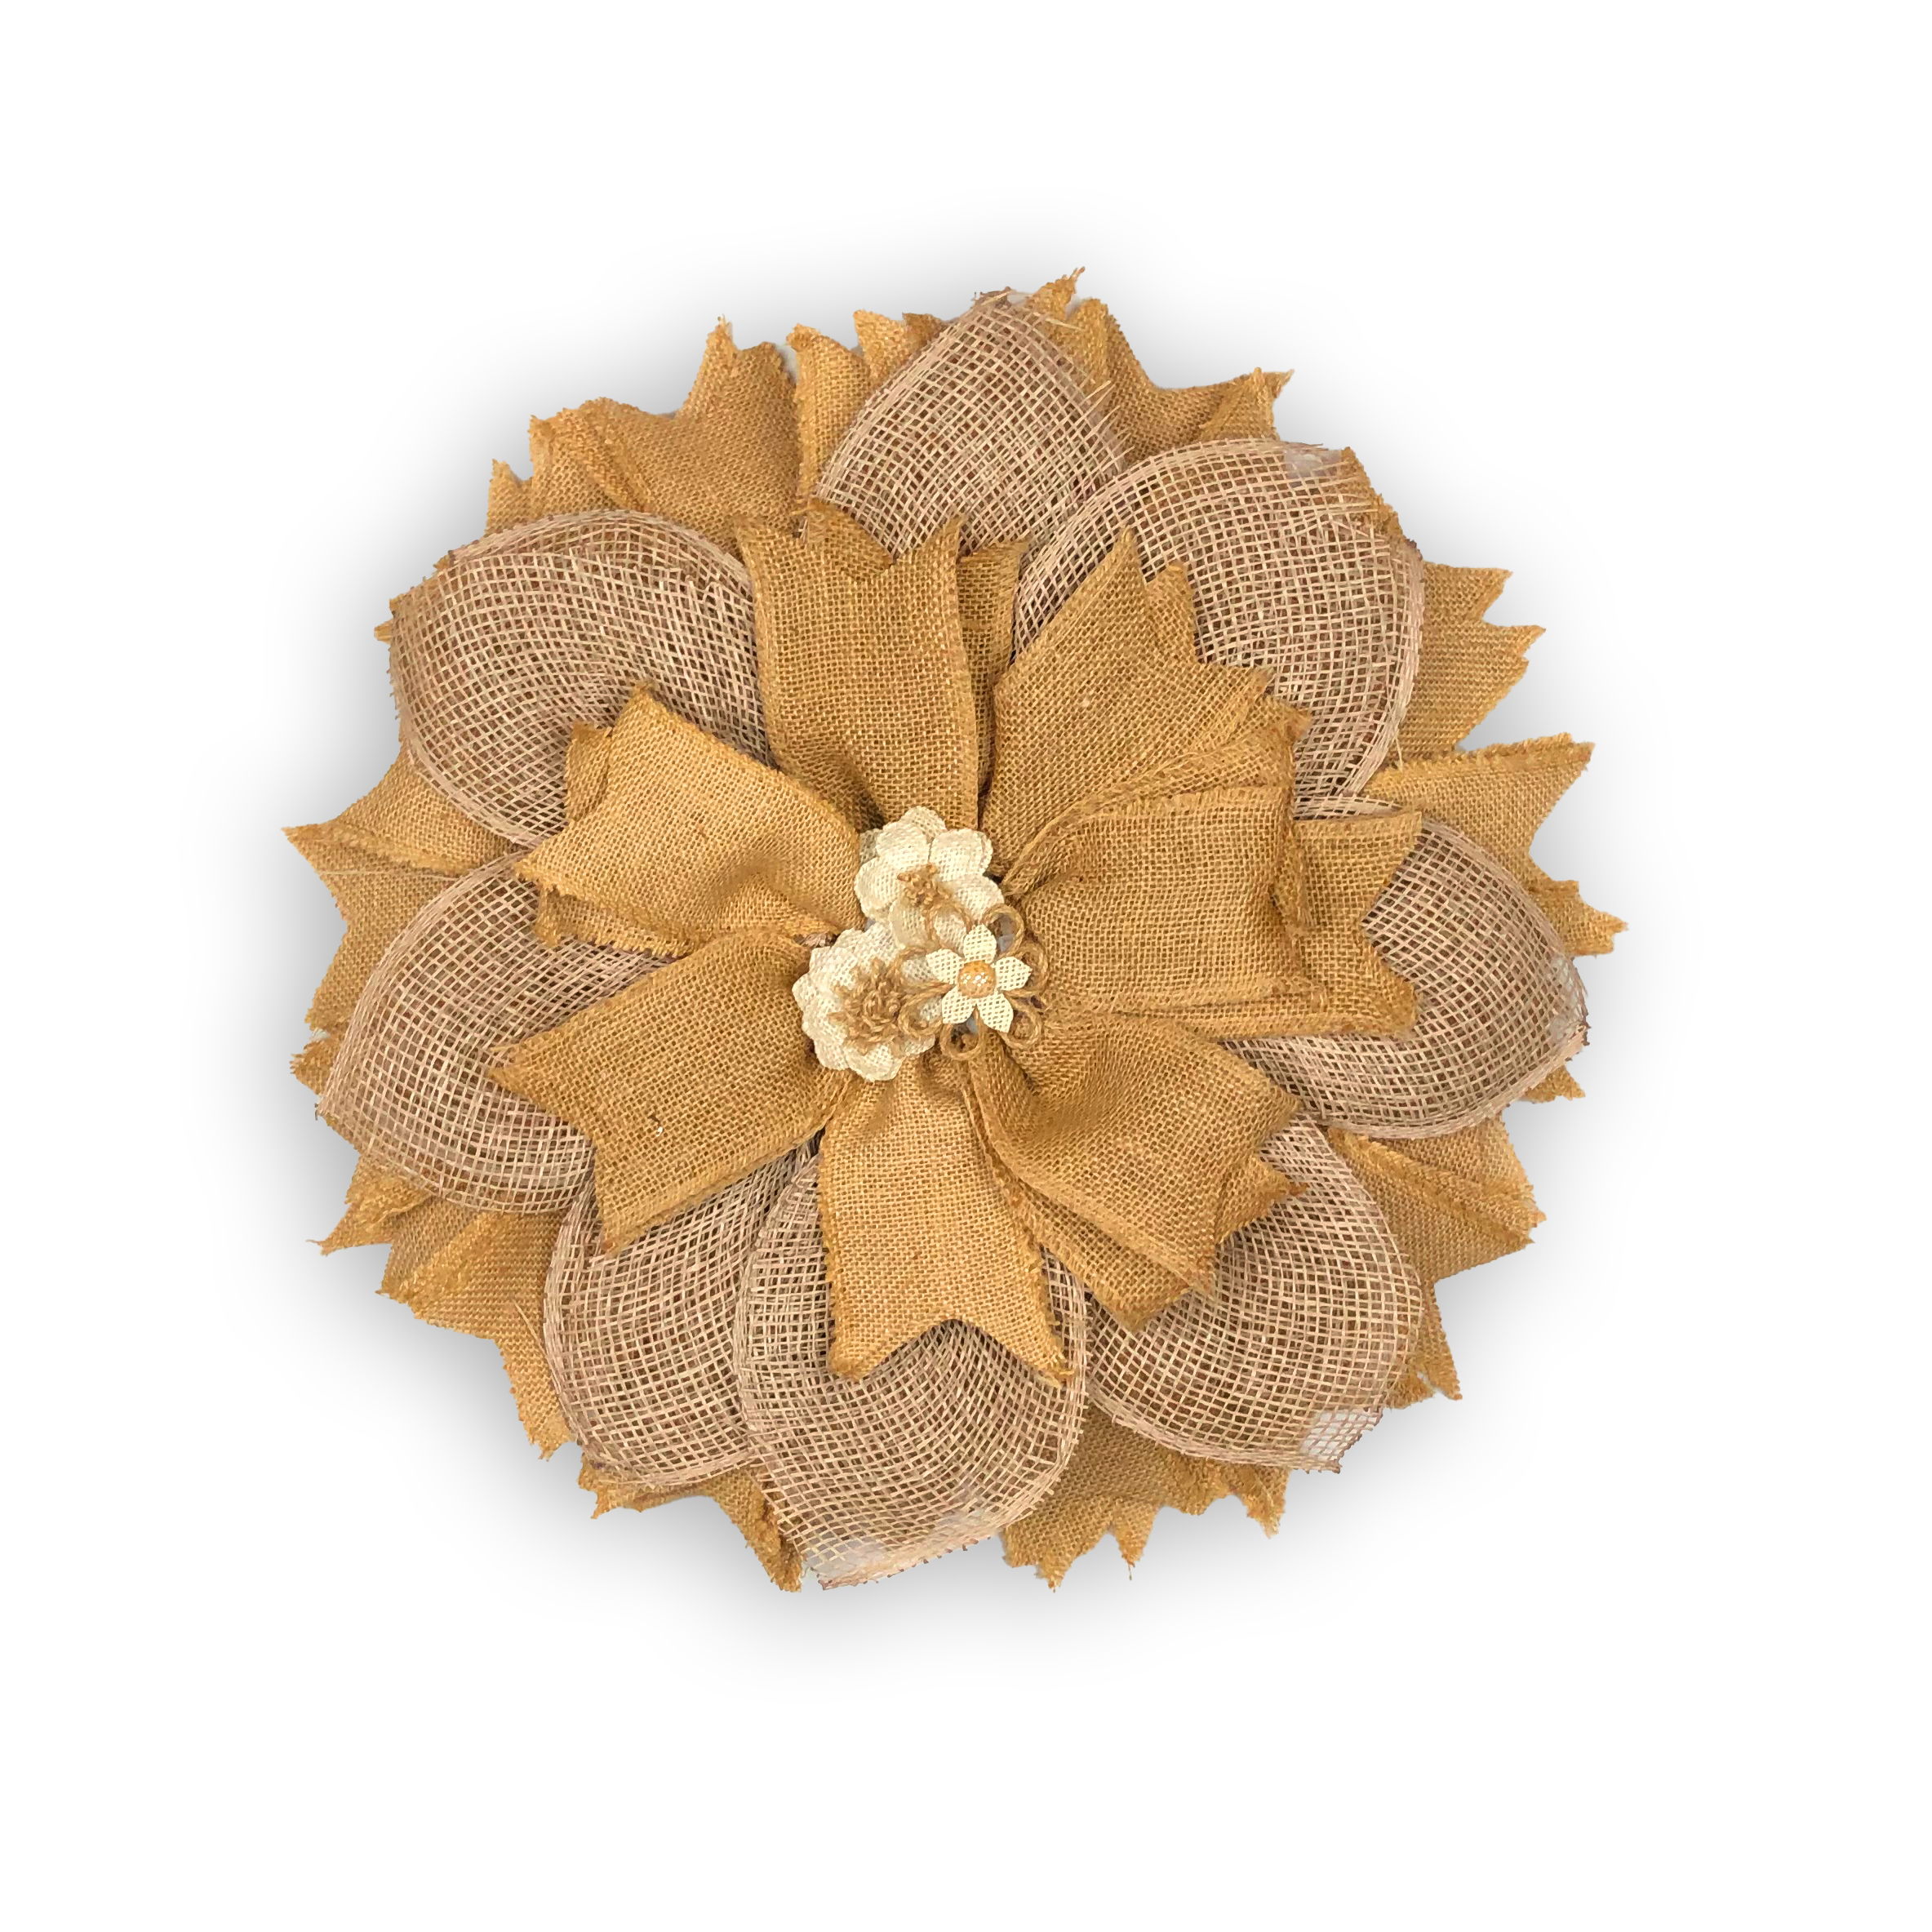 Beige and Wheat Colored Burlap Ribbons and Petals with Burlap Flowered  Center